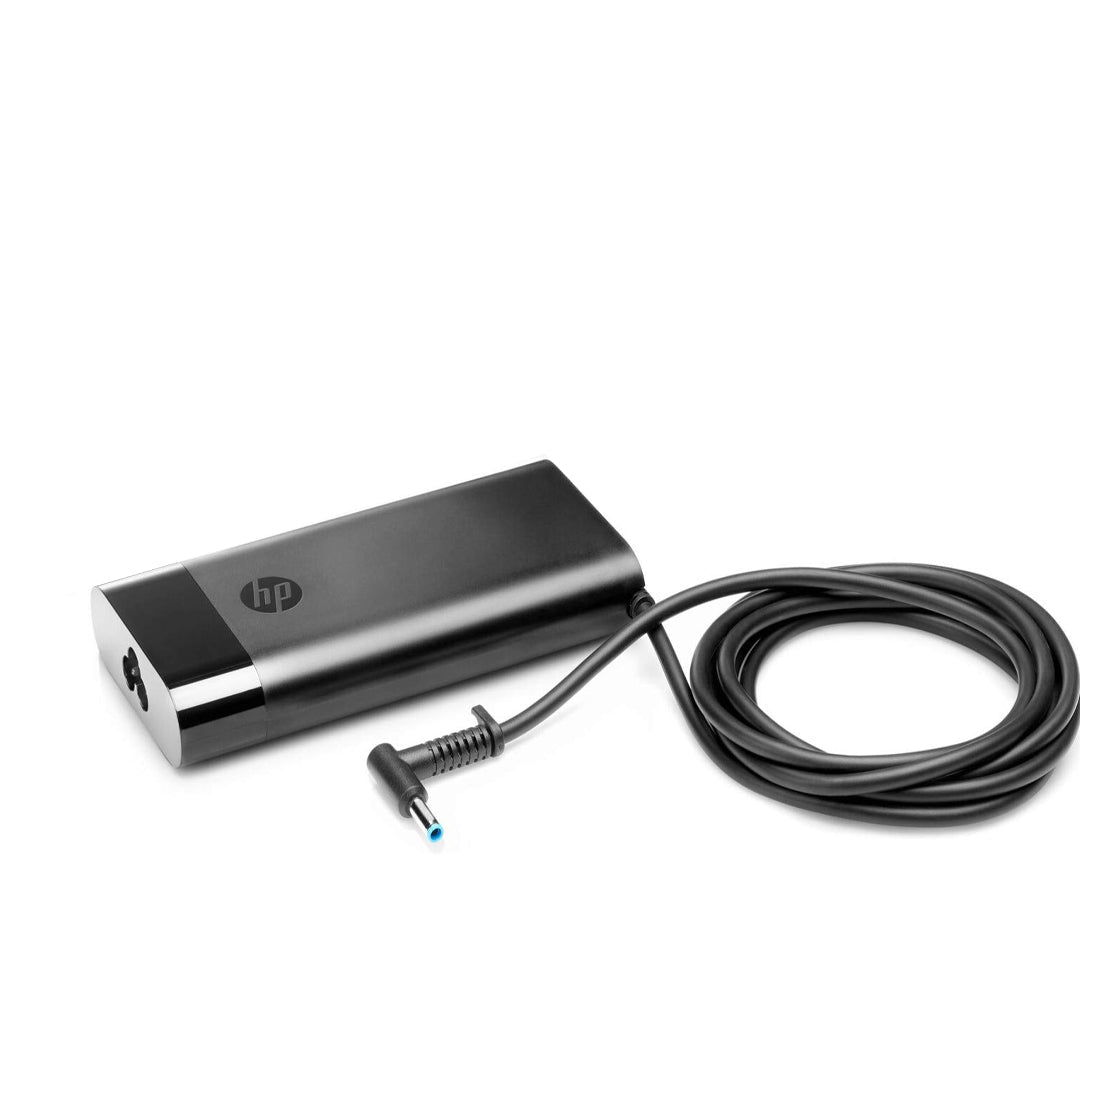 HP Original 150W 4.5mm Pin Slim Laptop Charger Adapter for ZBook 15u G3 With Power Cord